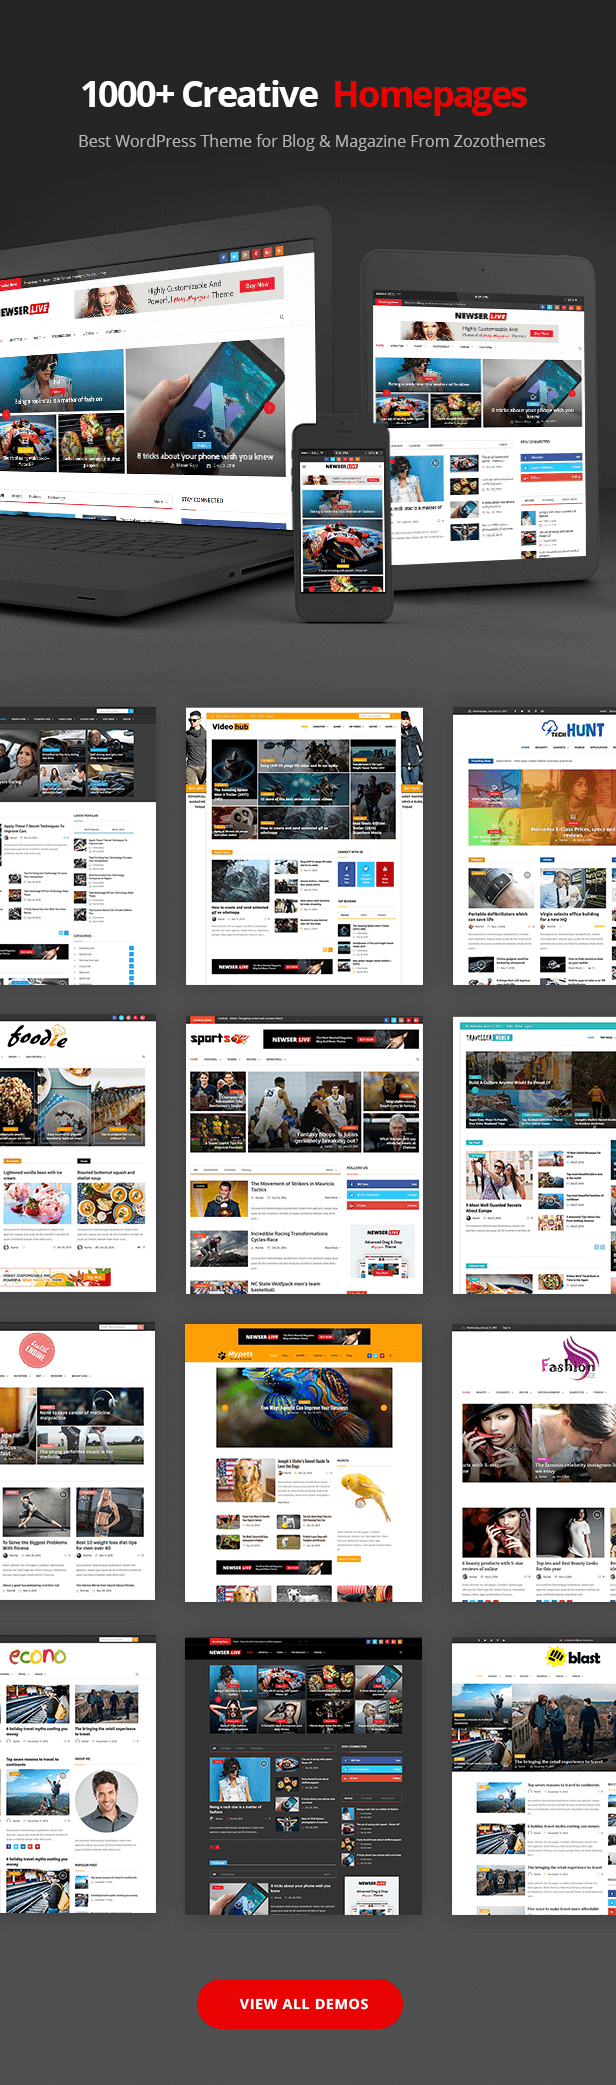 So big collection of creative homepages.